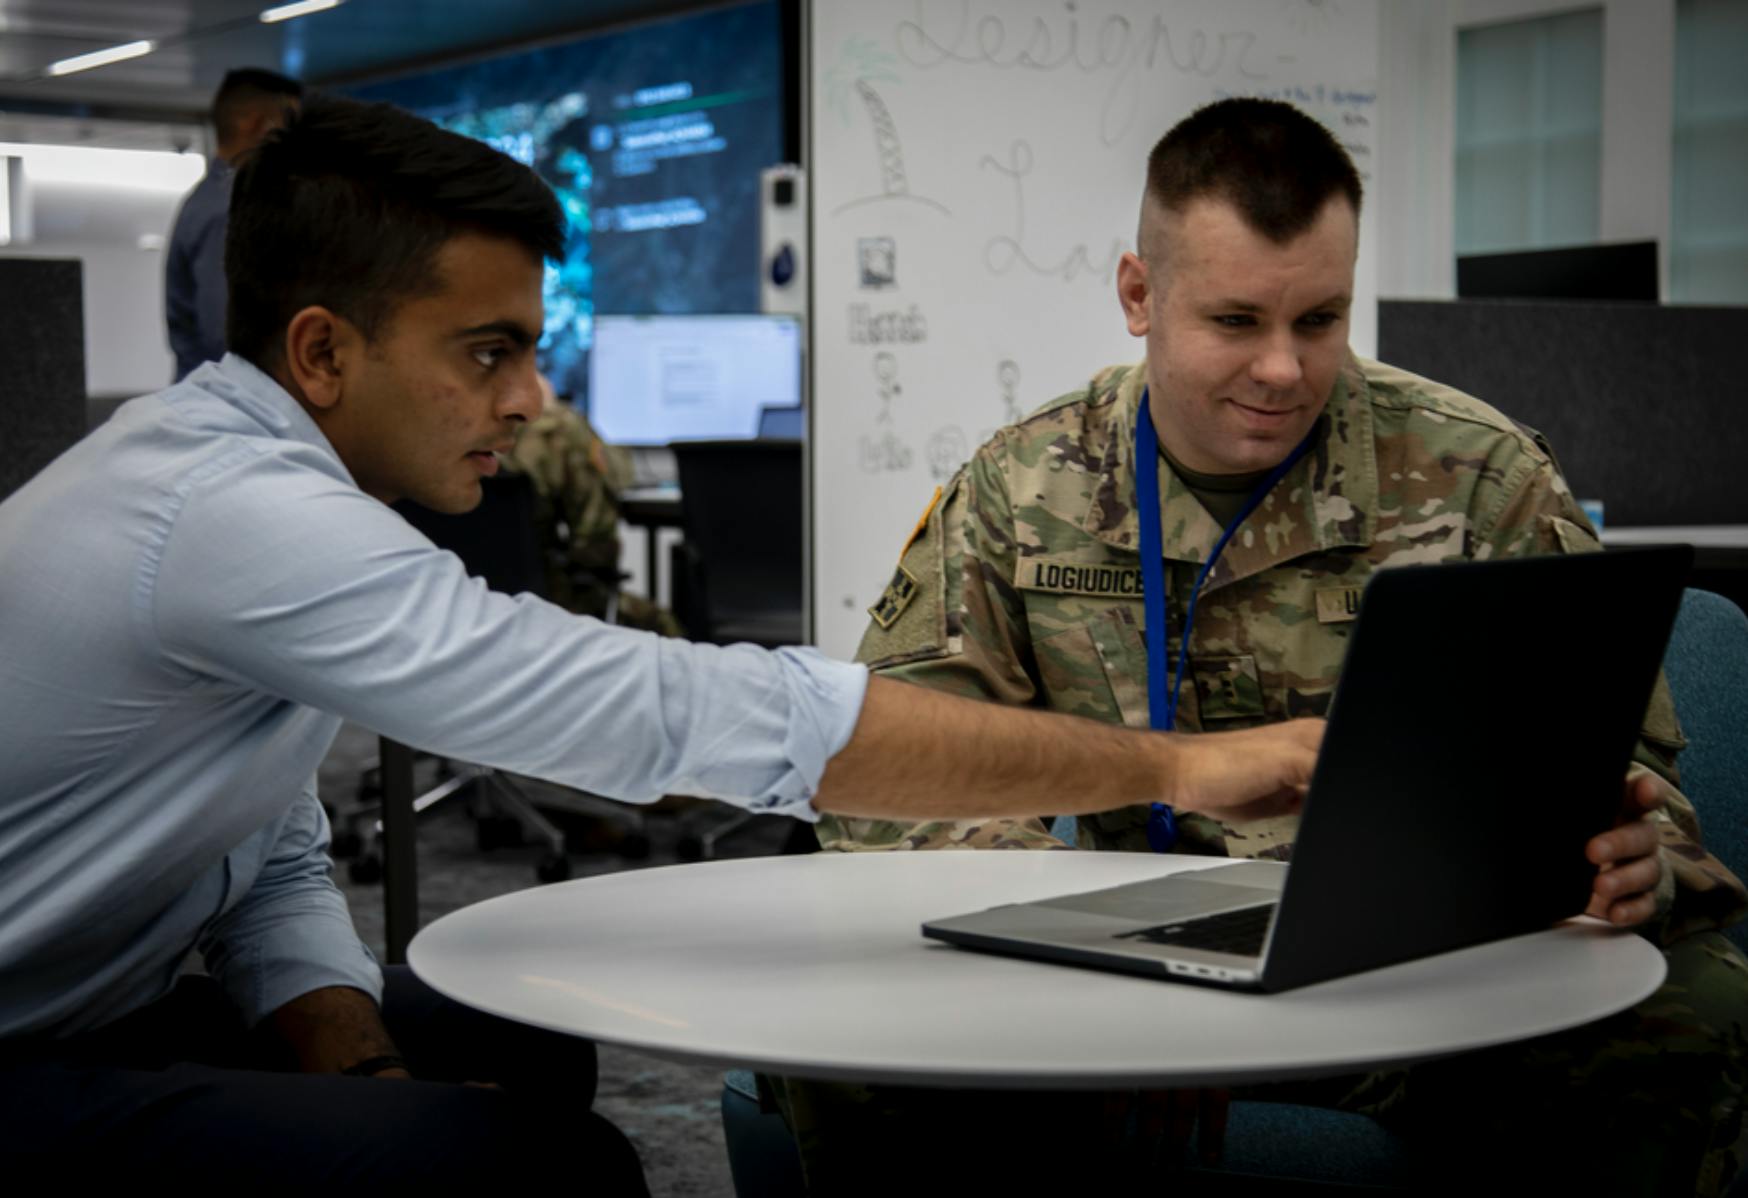 Image shows two men sitting at a table looking at a laptop, one pointing to the screen, the other in fatigues. Related to: software factories, software factory, dod modernization, digital transformation, rapid data sharing, secure data transfer, defense space, army software factory, cohort 6.